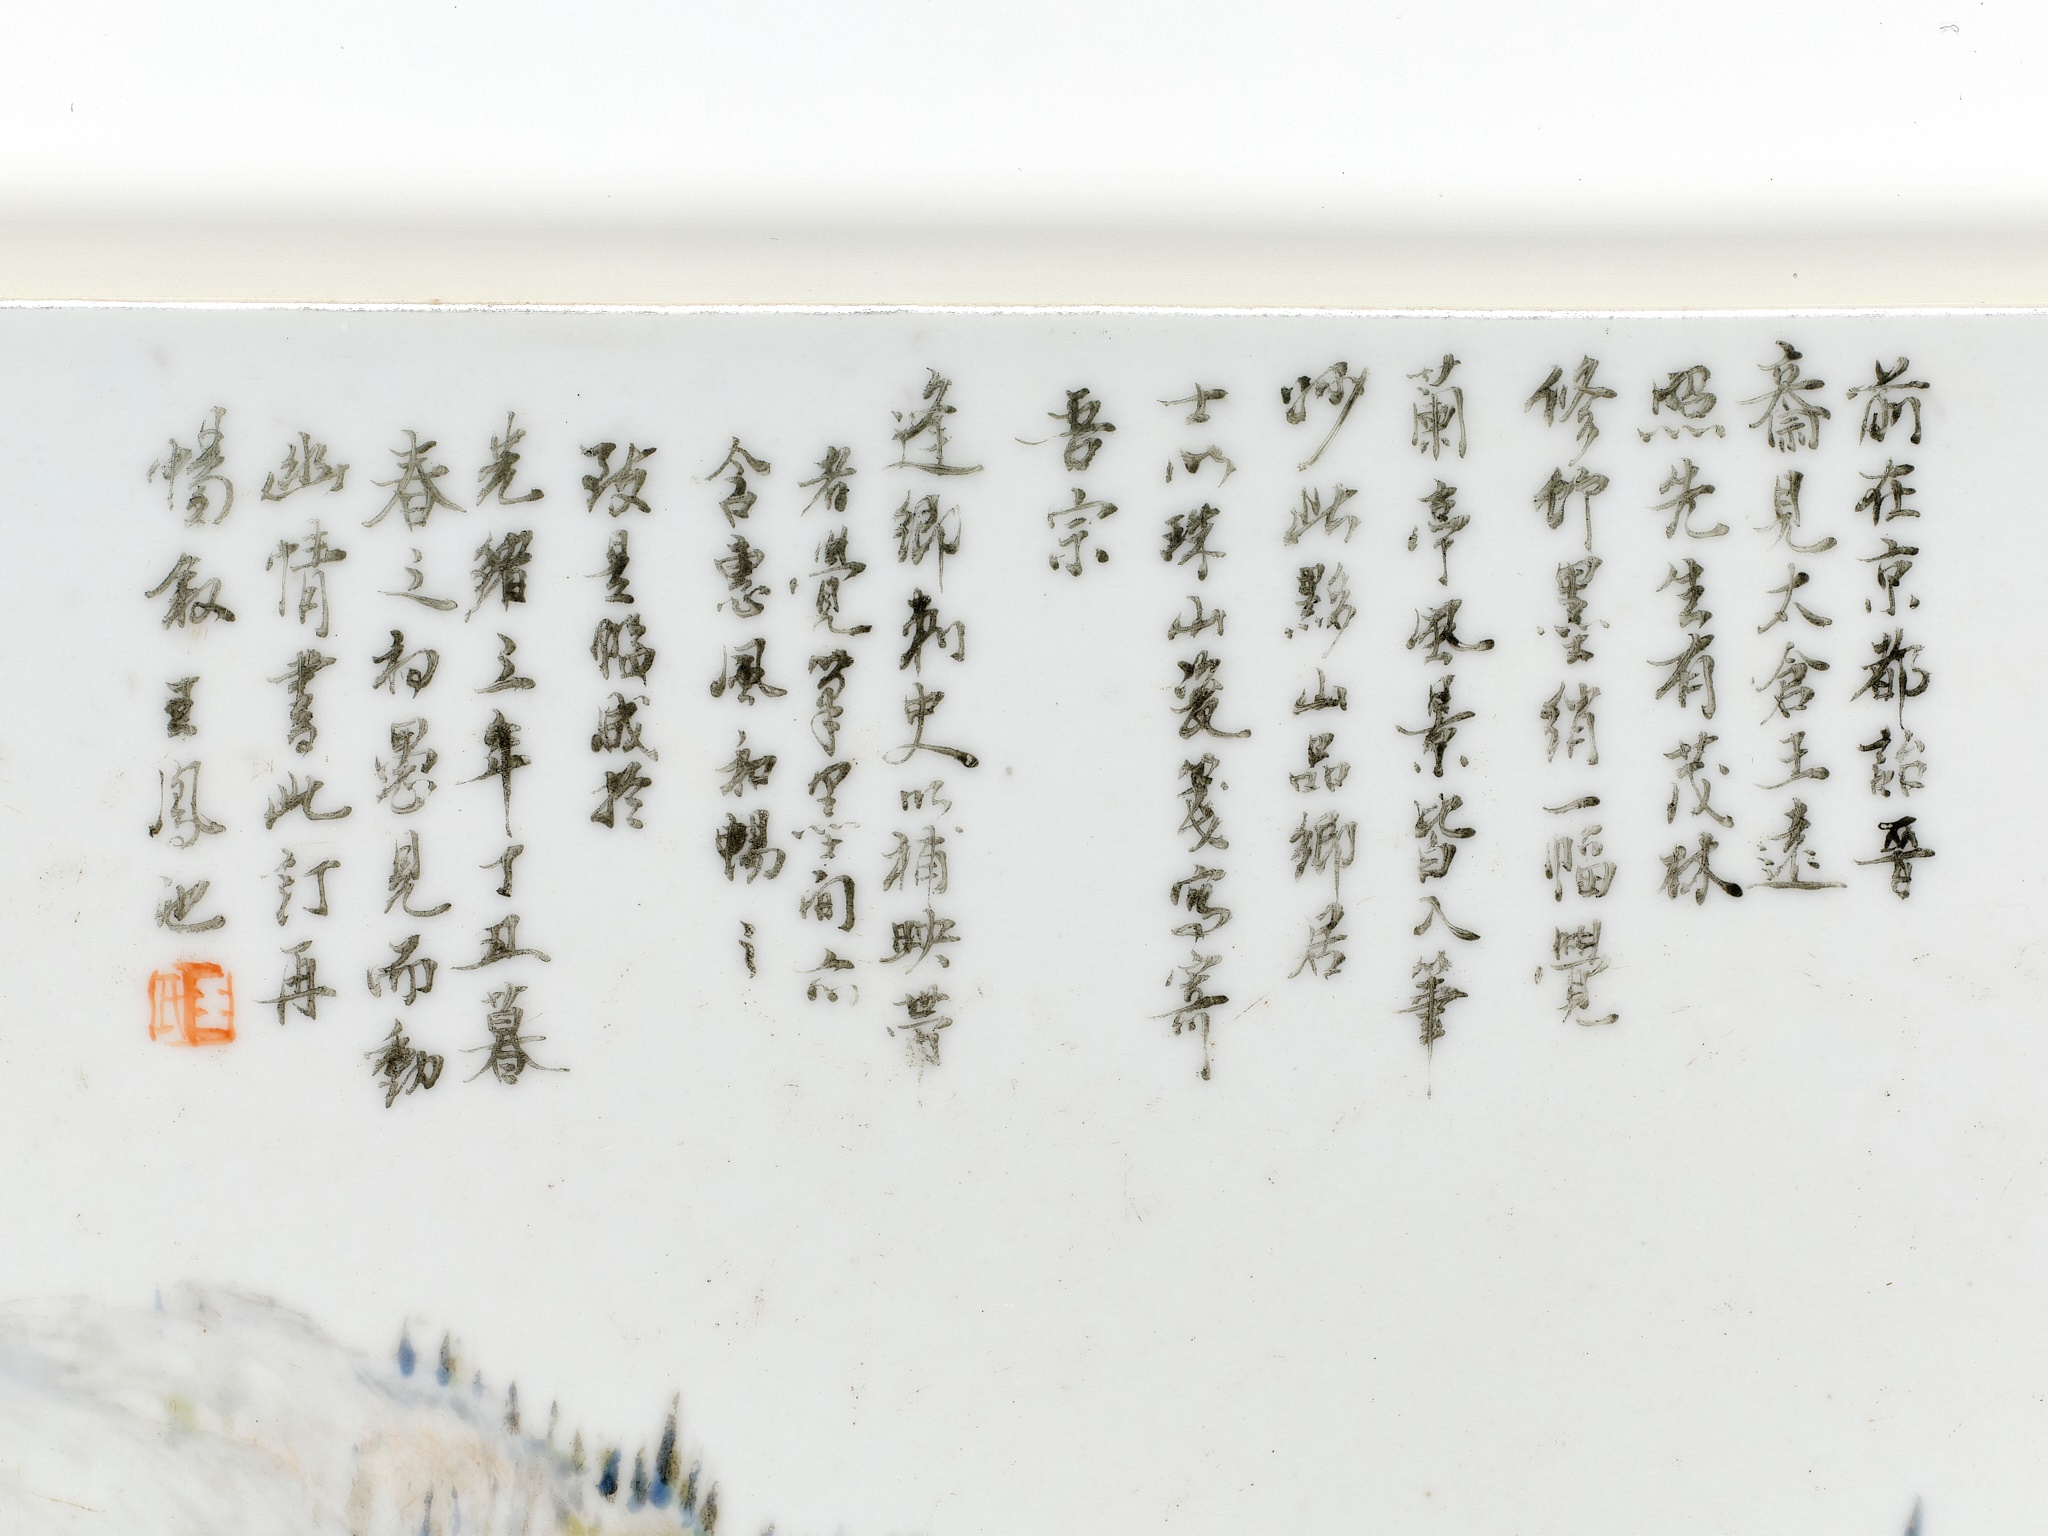 A 'QIANJIANG CAI' ENAMELED 'LUSH FORESTS AND HIGH BAMBOO' PLAQUE, BY JIN PINQING (1862-1908) - Image 7 of 9